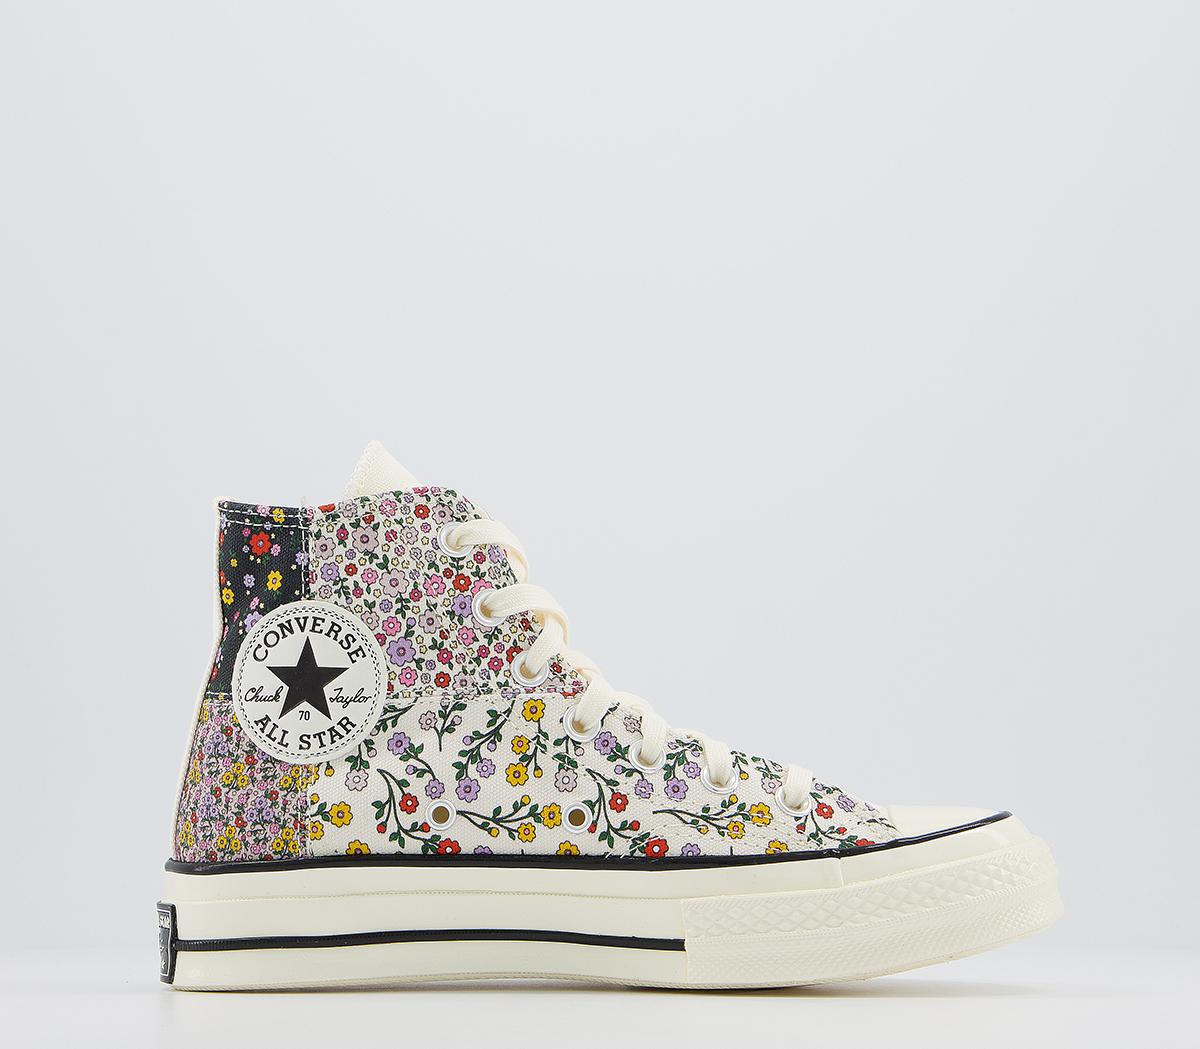 ConverseAll Star Hi 70s TrainersEgret Multi Black Floral Exclusive